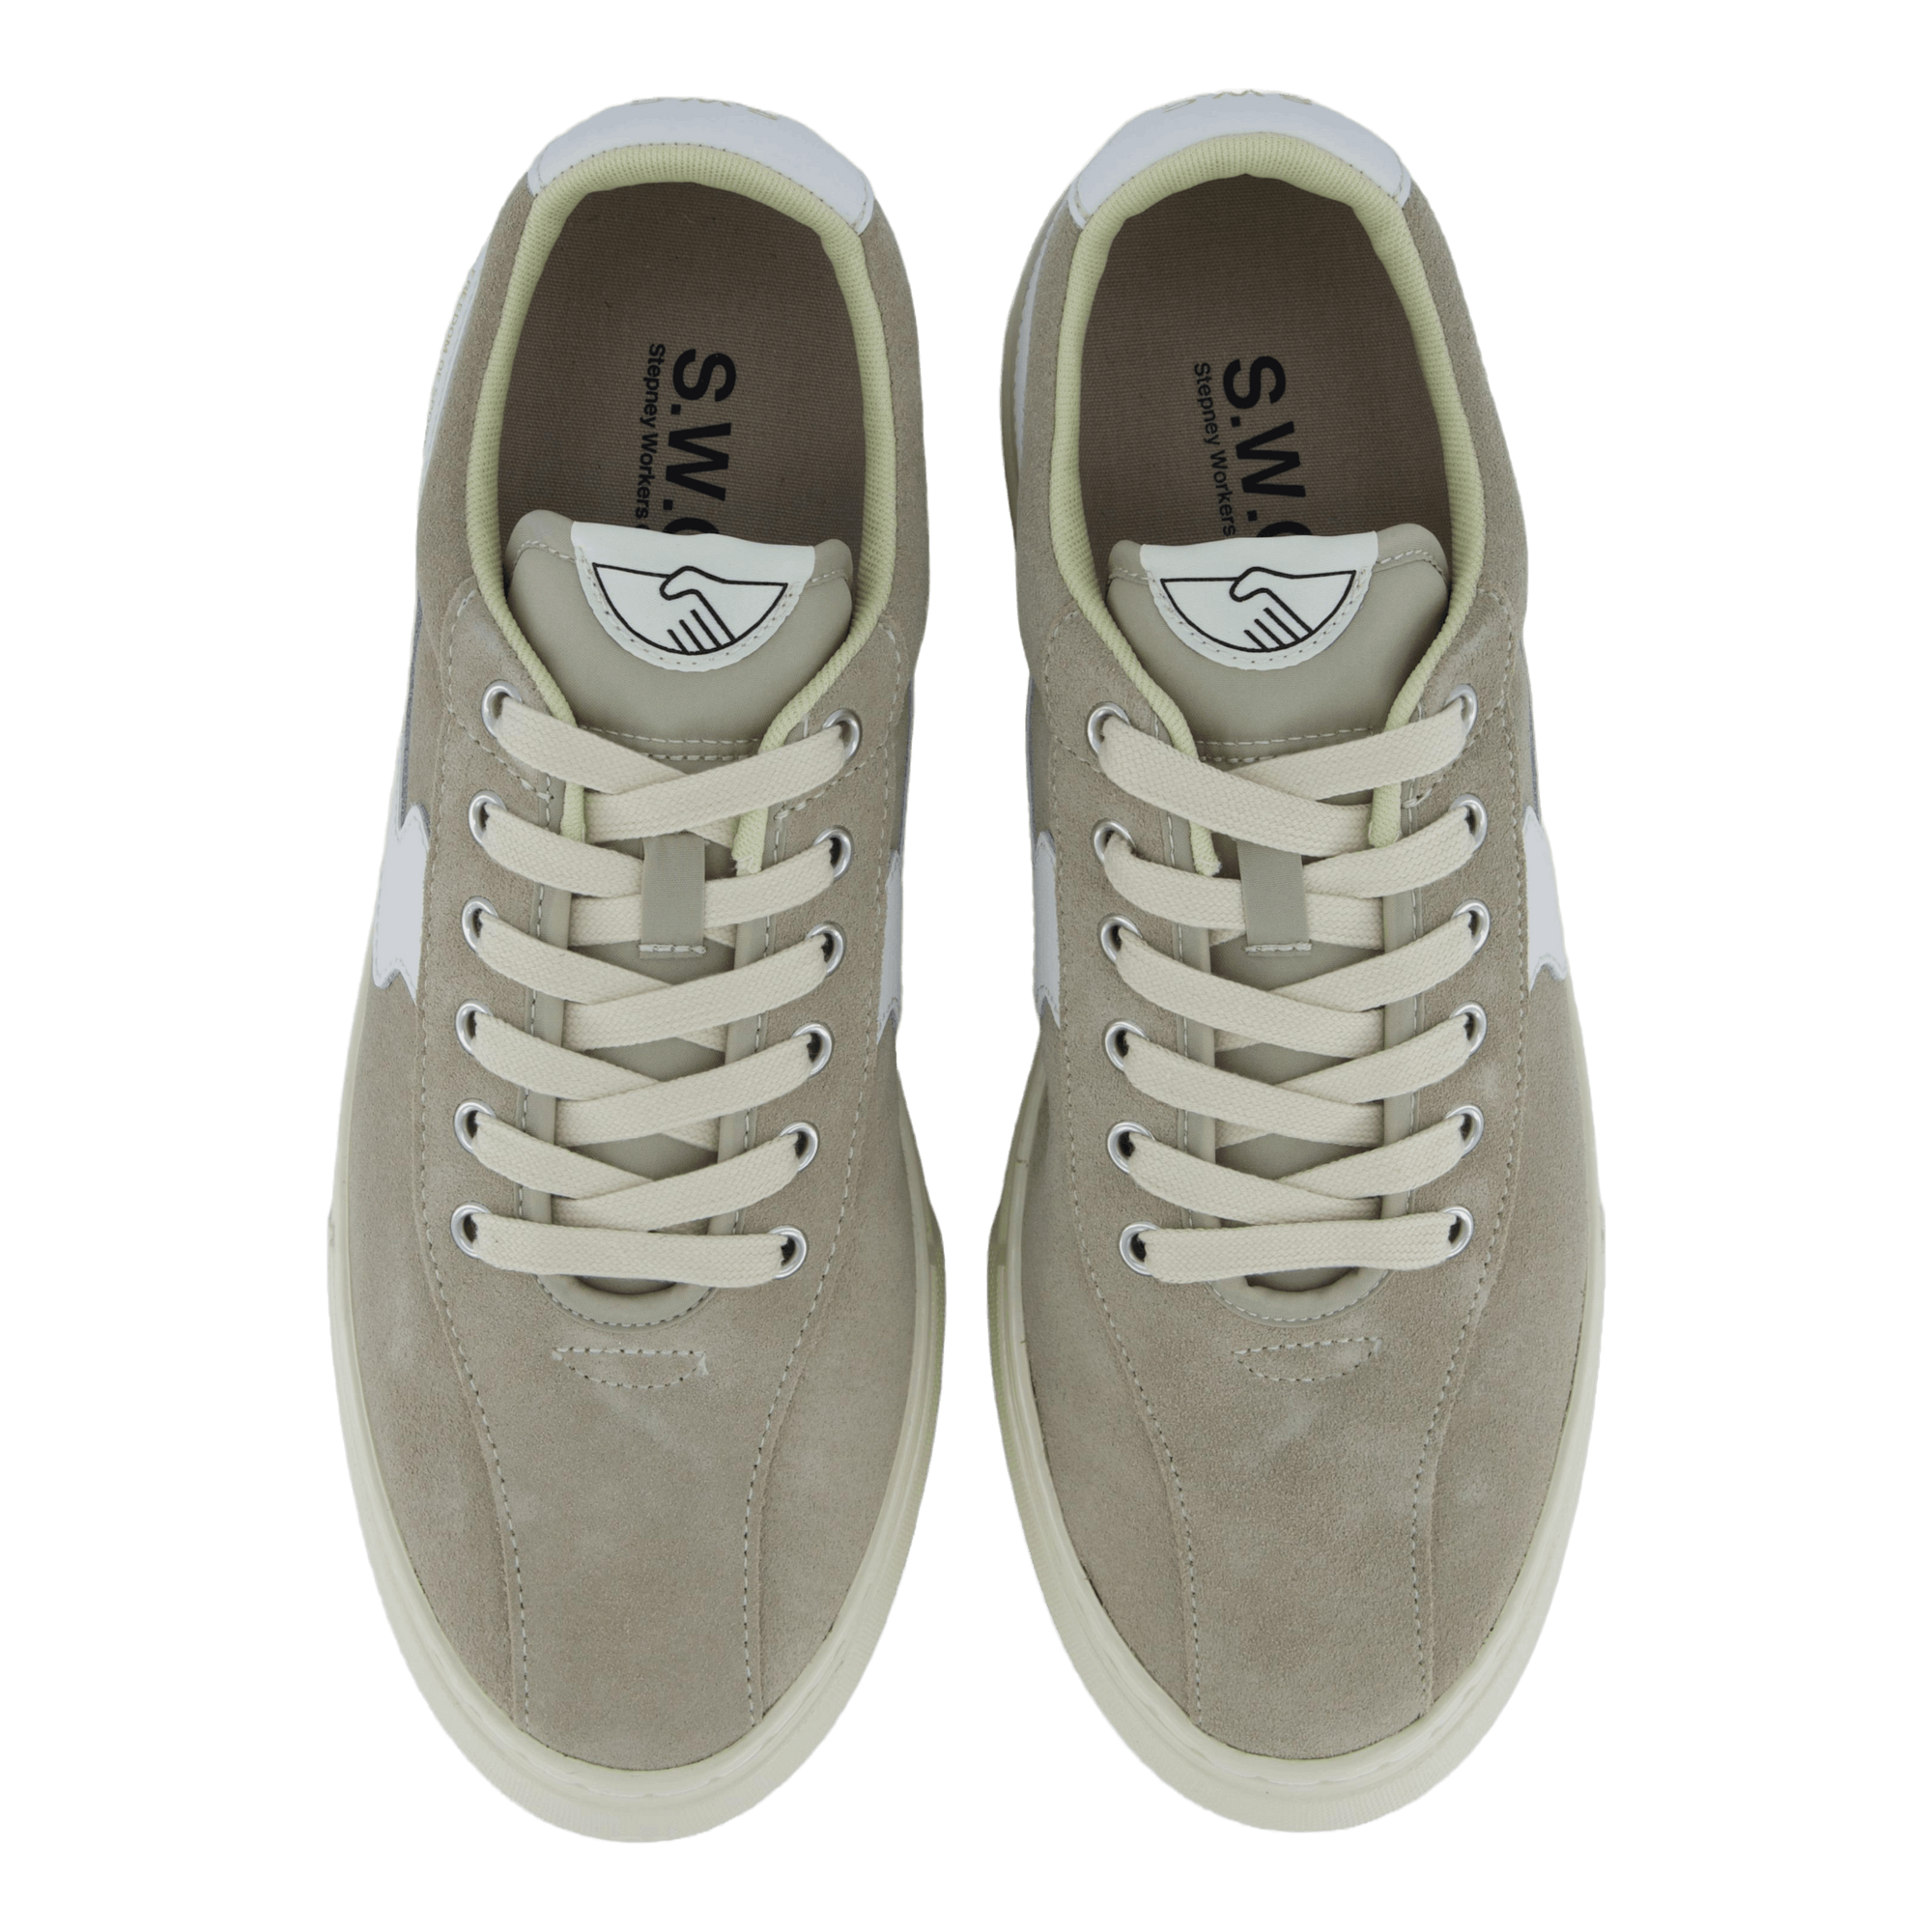 Dellow S-strike Cup Suede Lt Grey & White